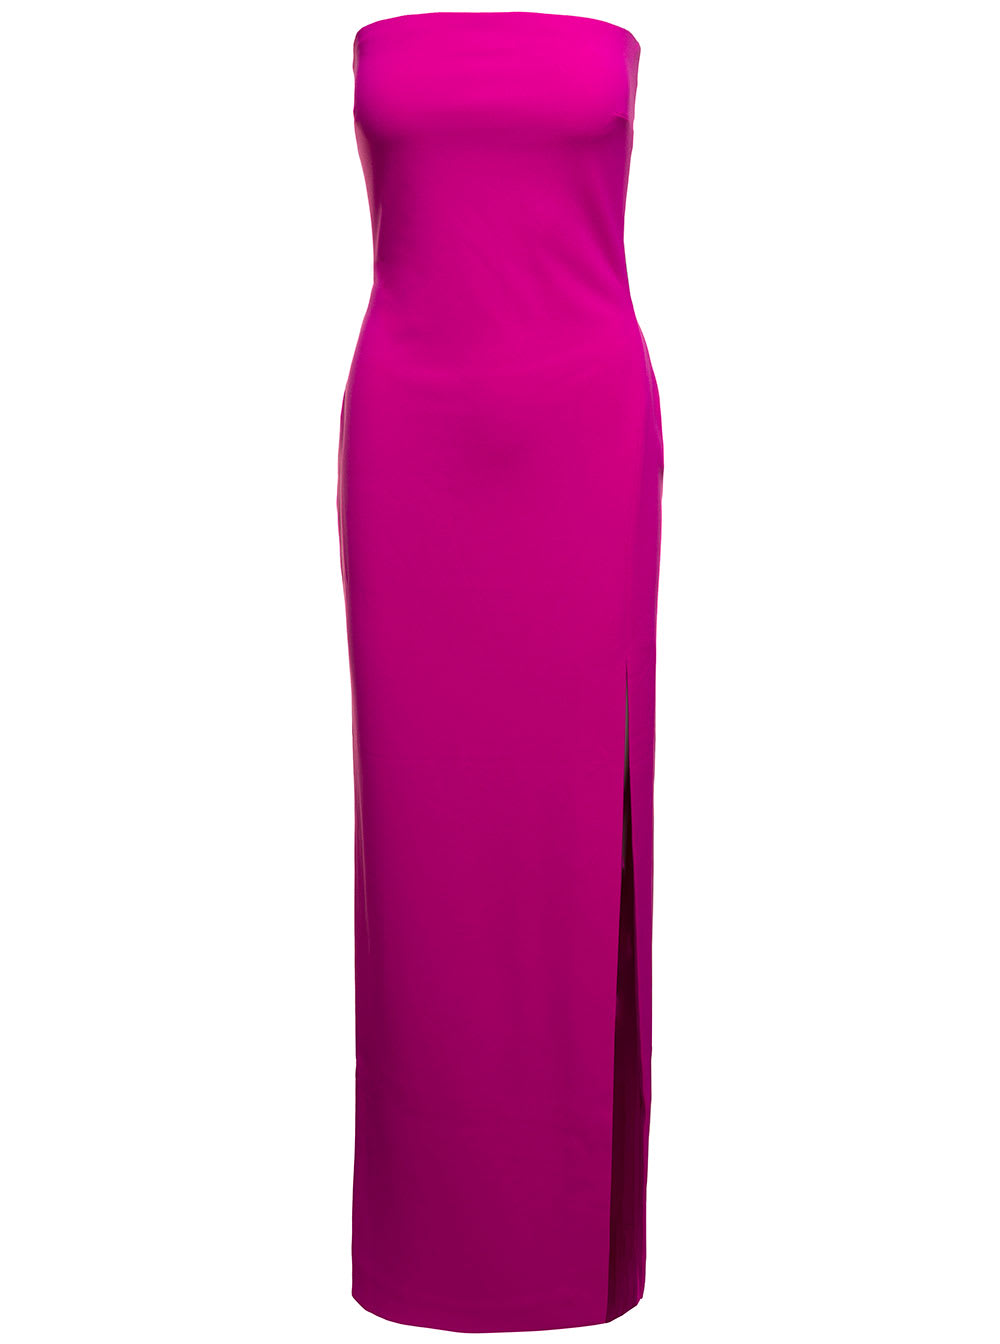 SOLACE LONDON FUCHSIA MAXI ZORA DRESS WITH DEEP FRONT VENT IN POLYESTER WOMAN